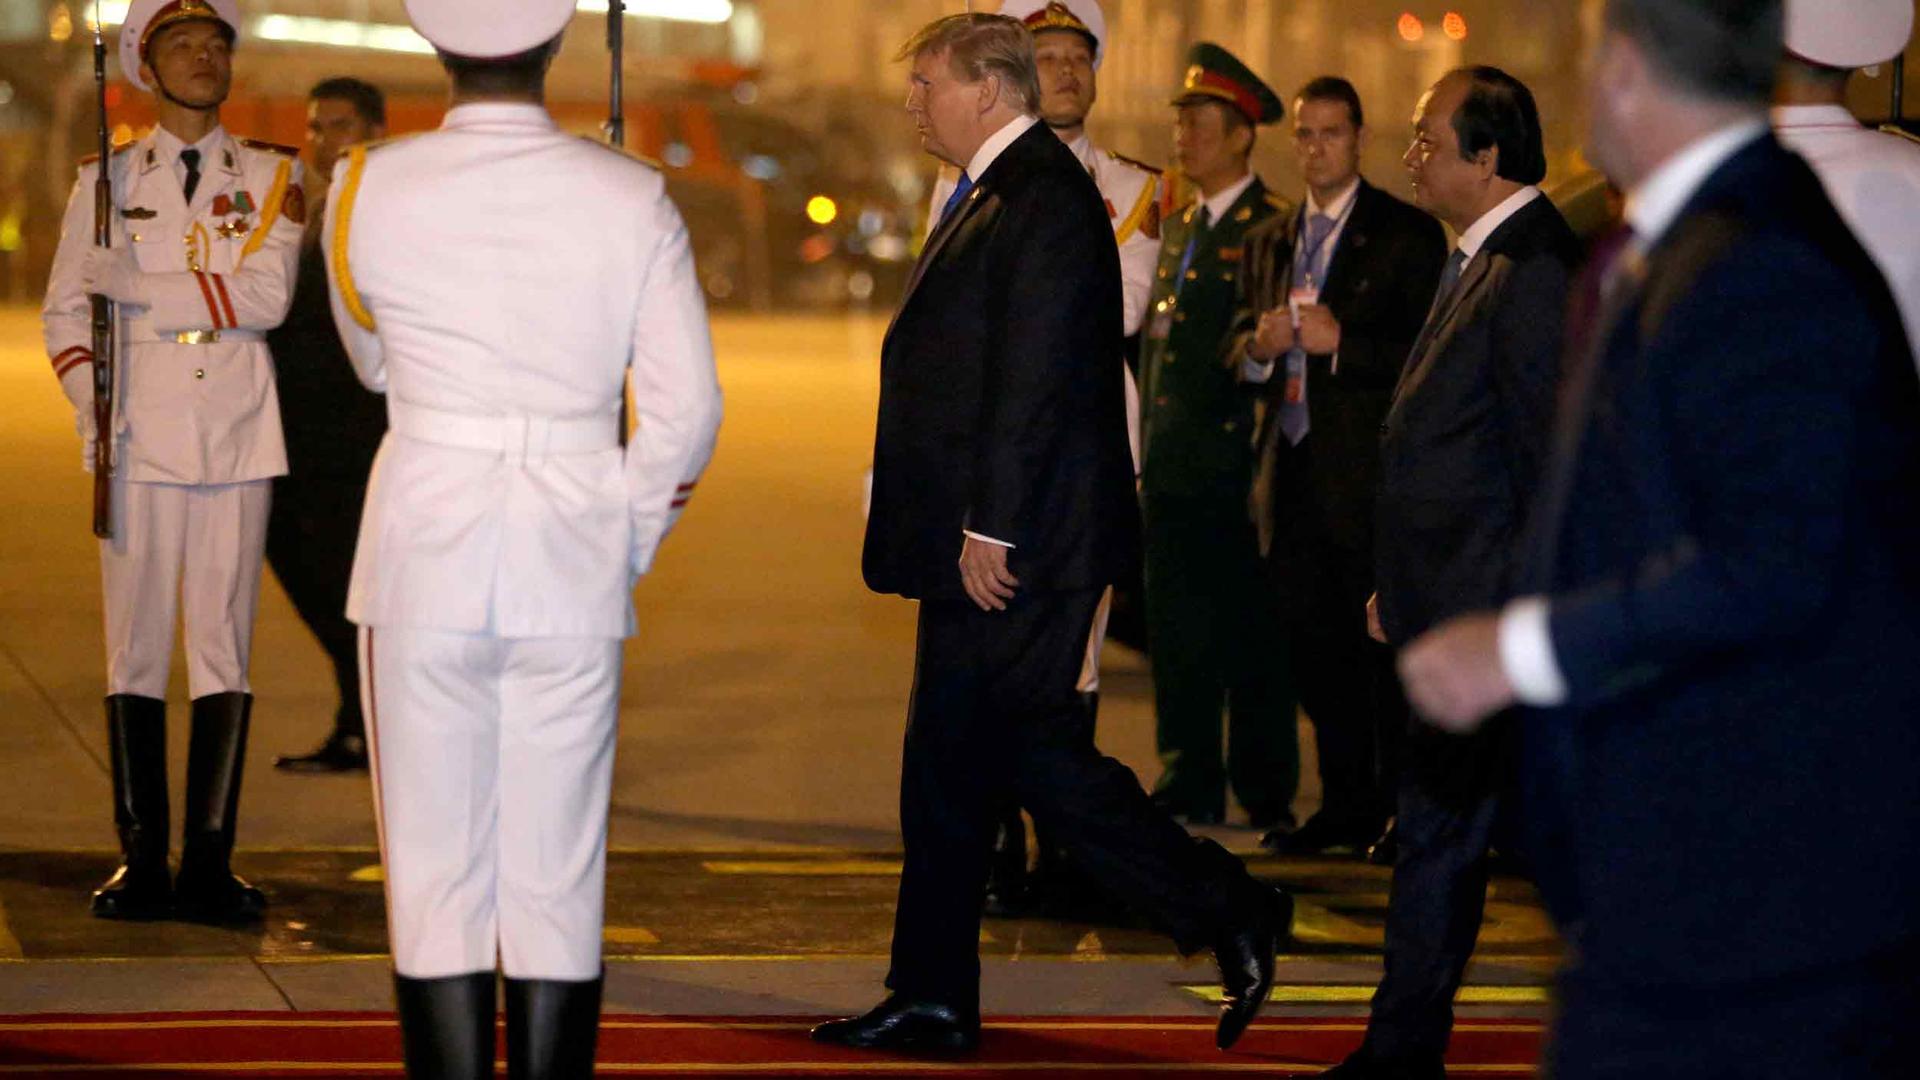 US President Donald Trump walks on a red carpet flanked by Vietnamese military wearing white uniforms.